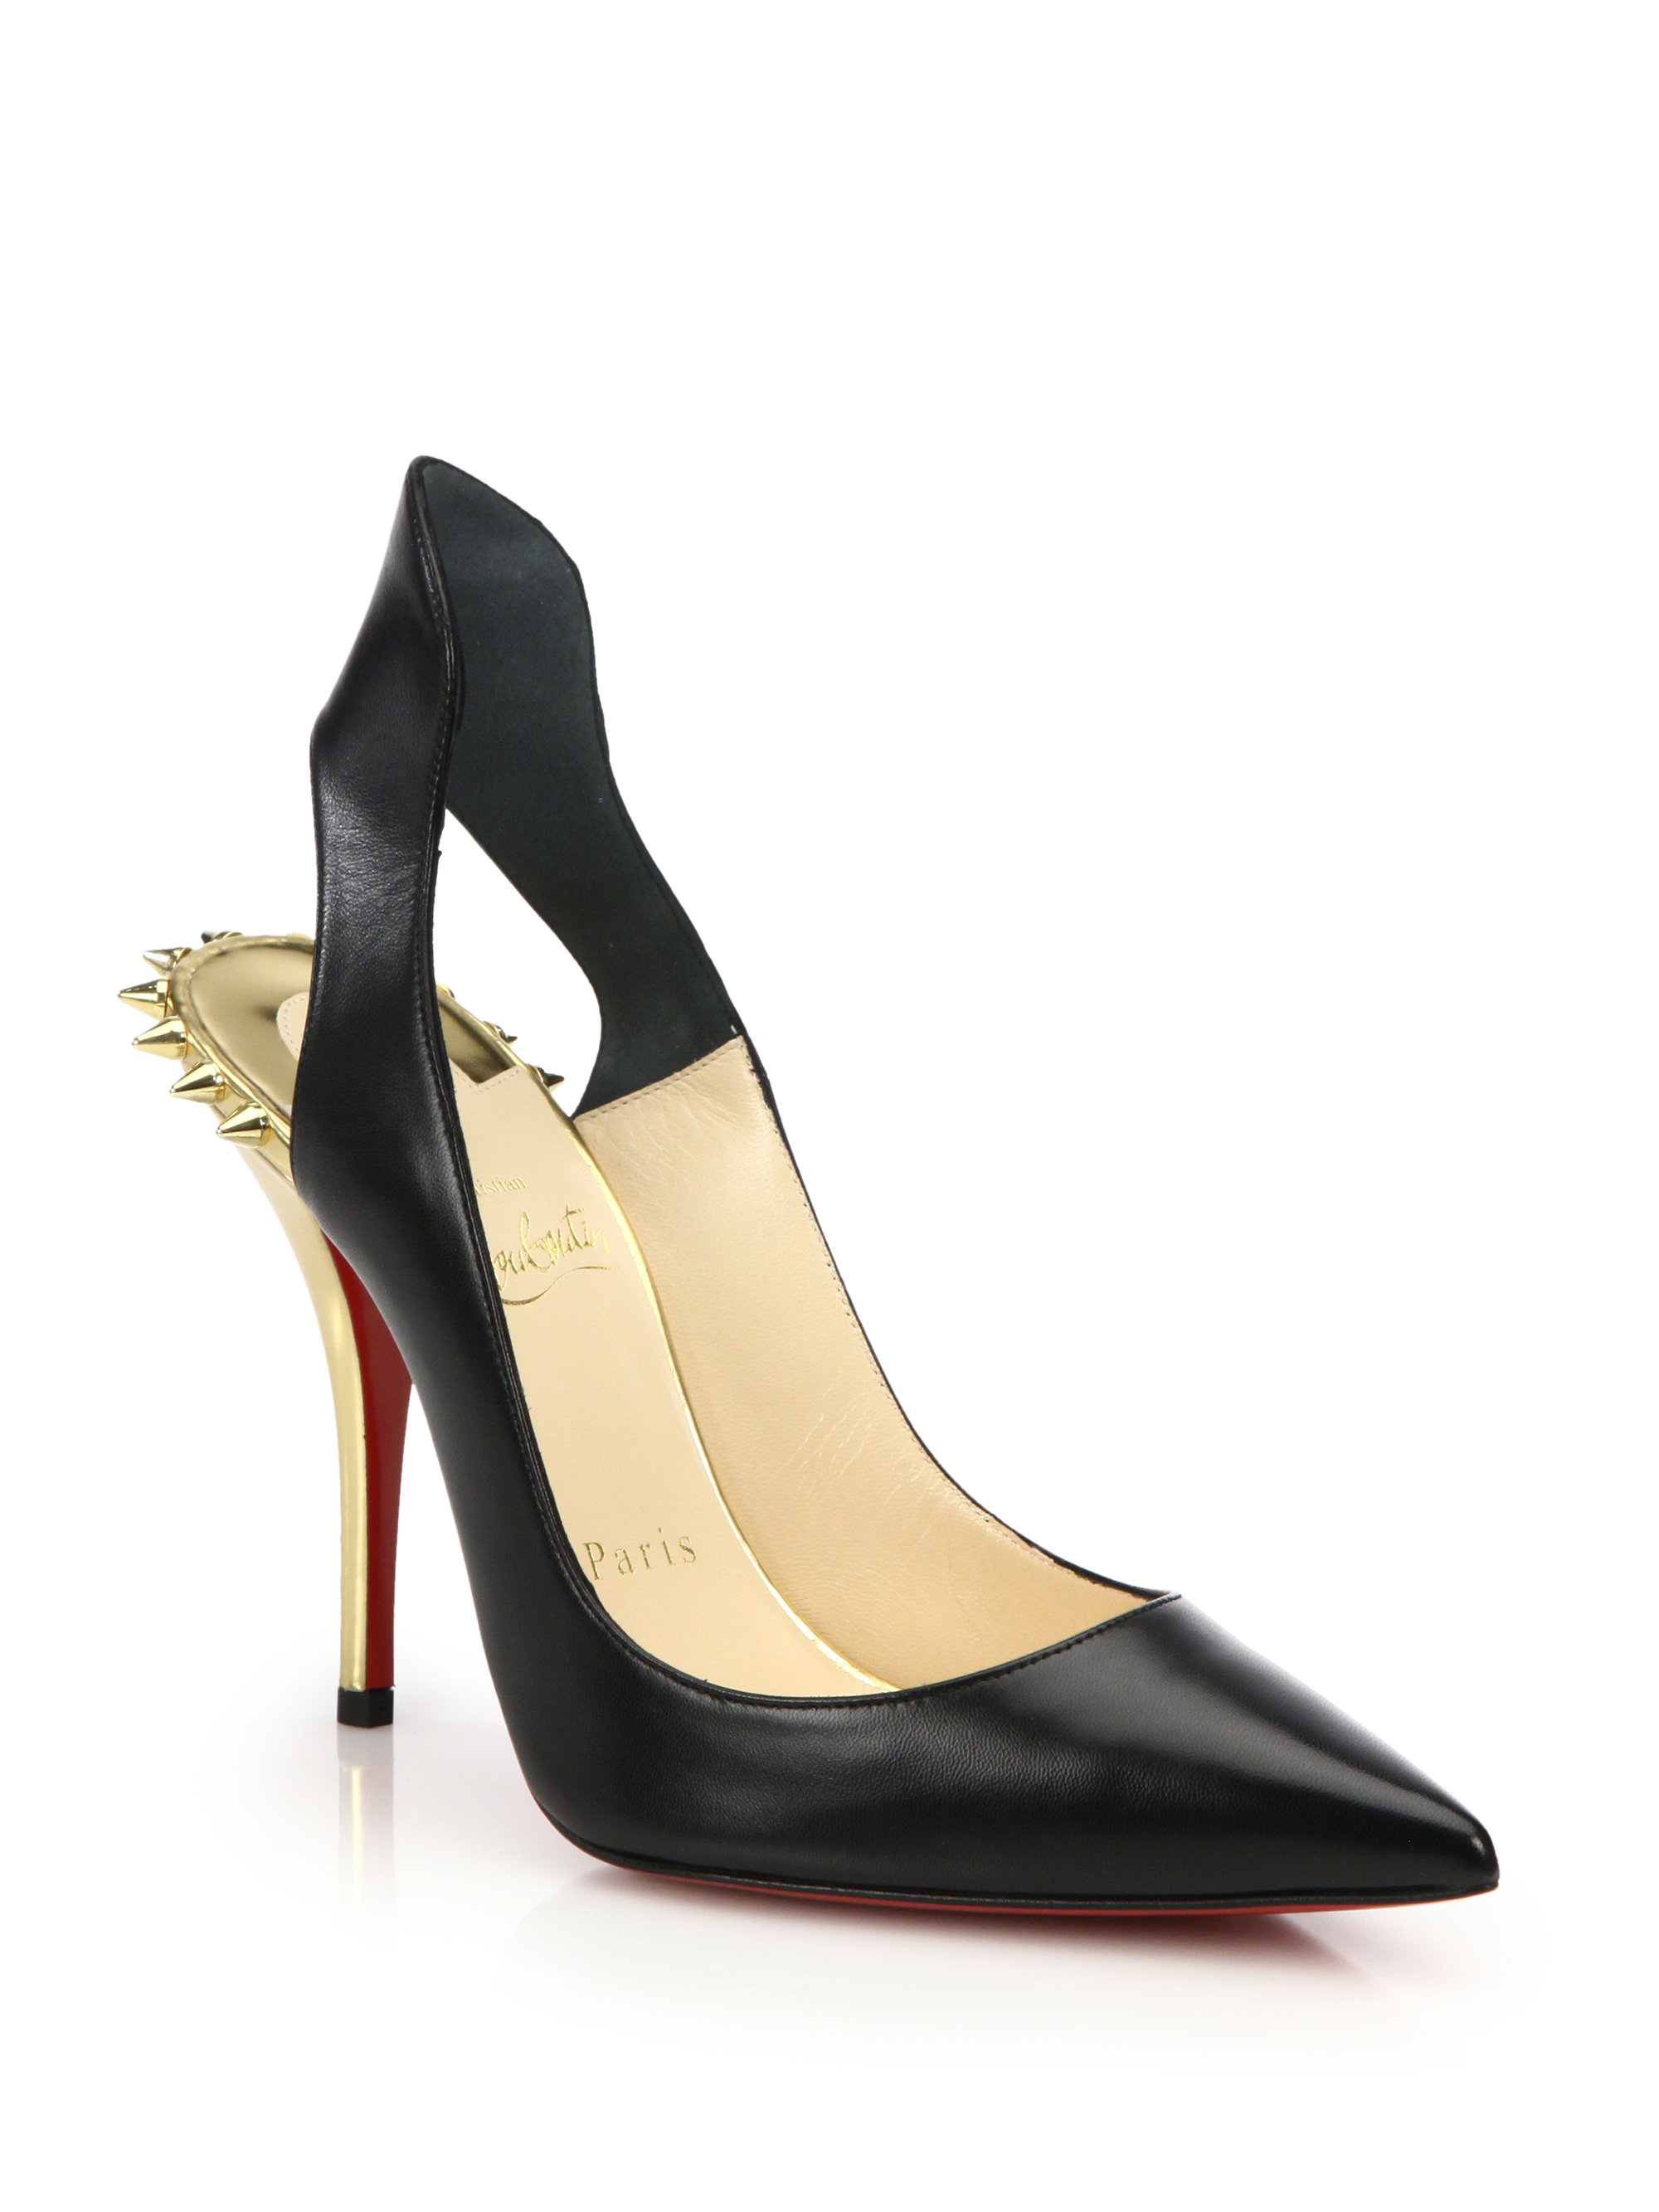 red bottom sneakers for men - Christian louboutin Survivita Spiked Leather Slingback Pumps in ...